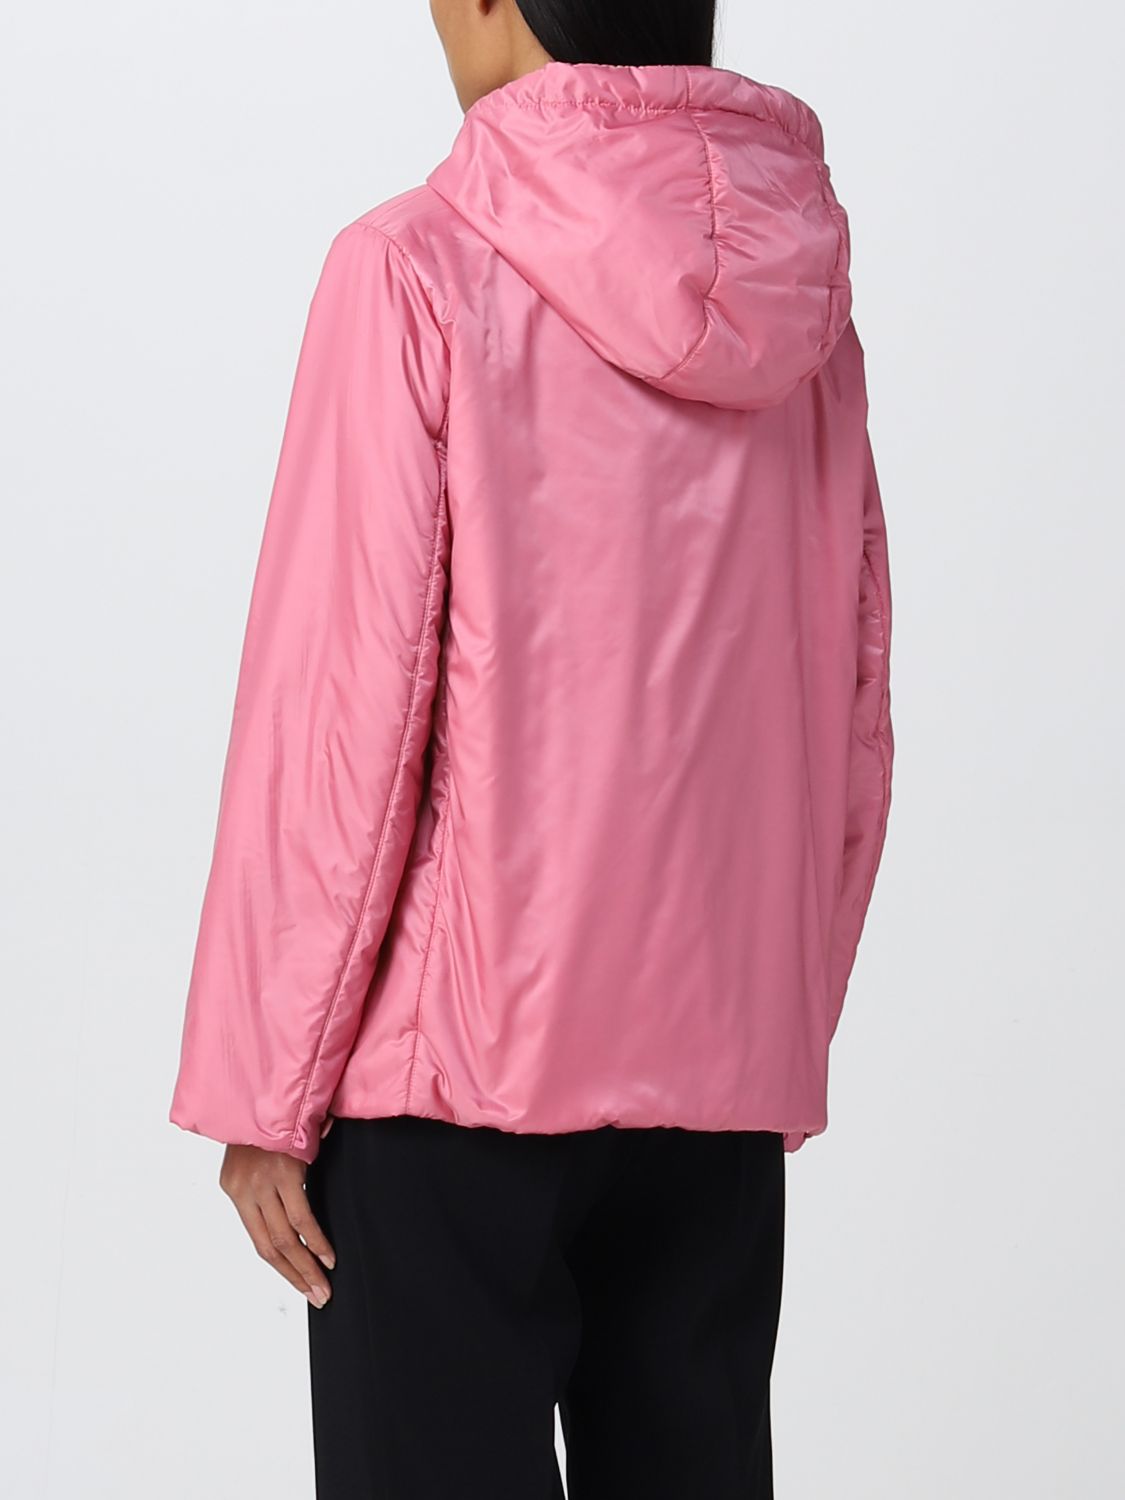 jacket for woman - Pink  Max Mara The Cube jacket 2394811237600 online at